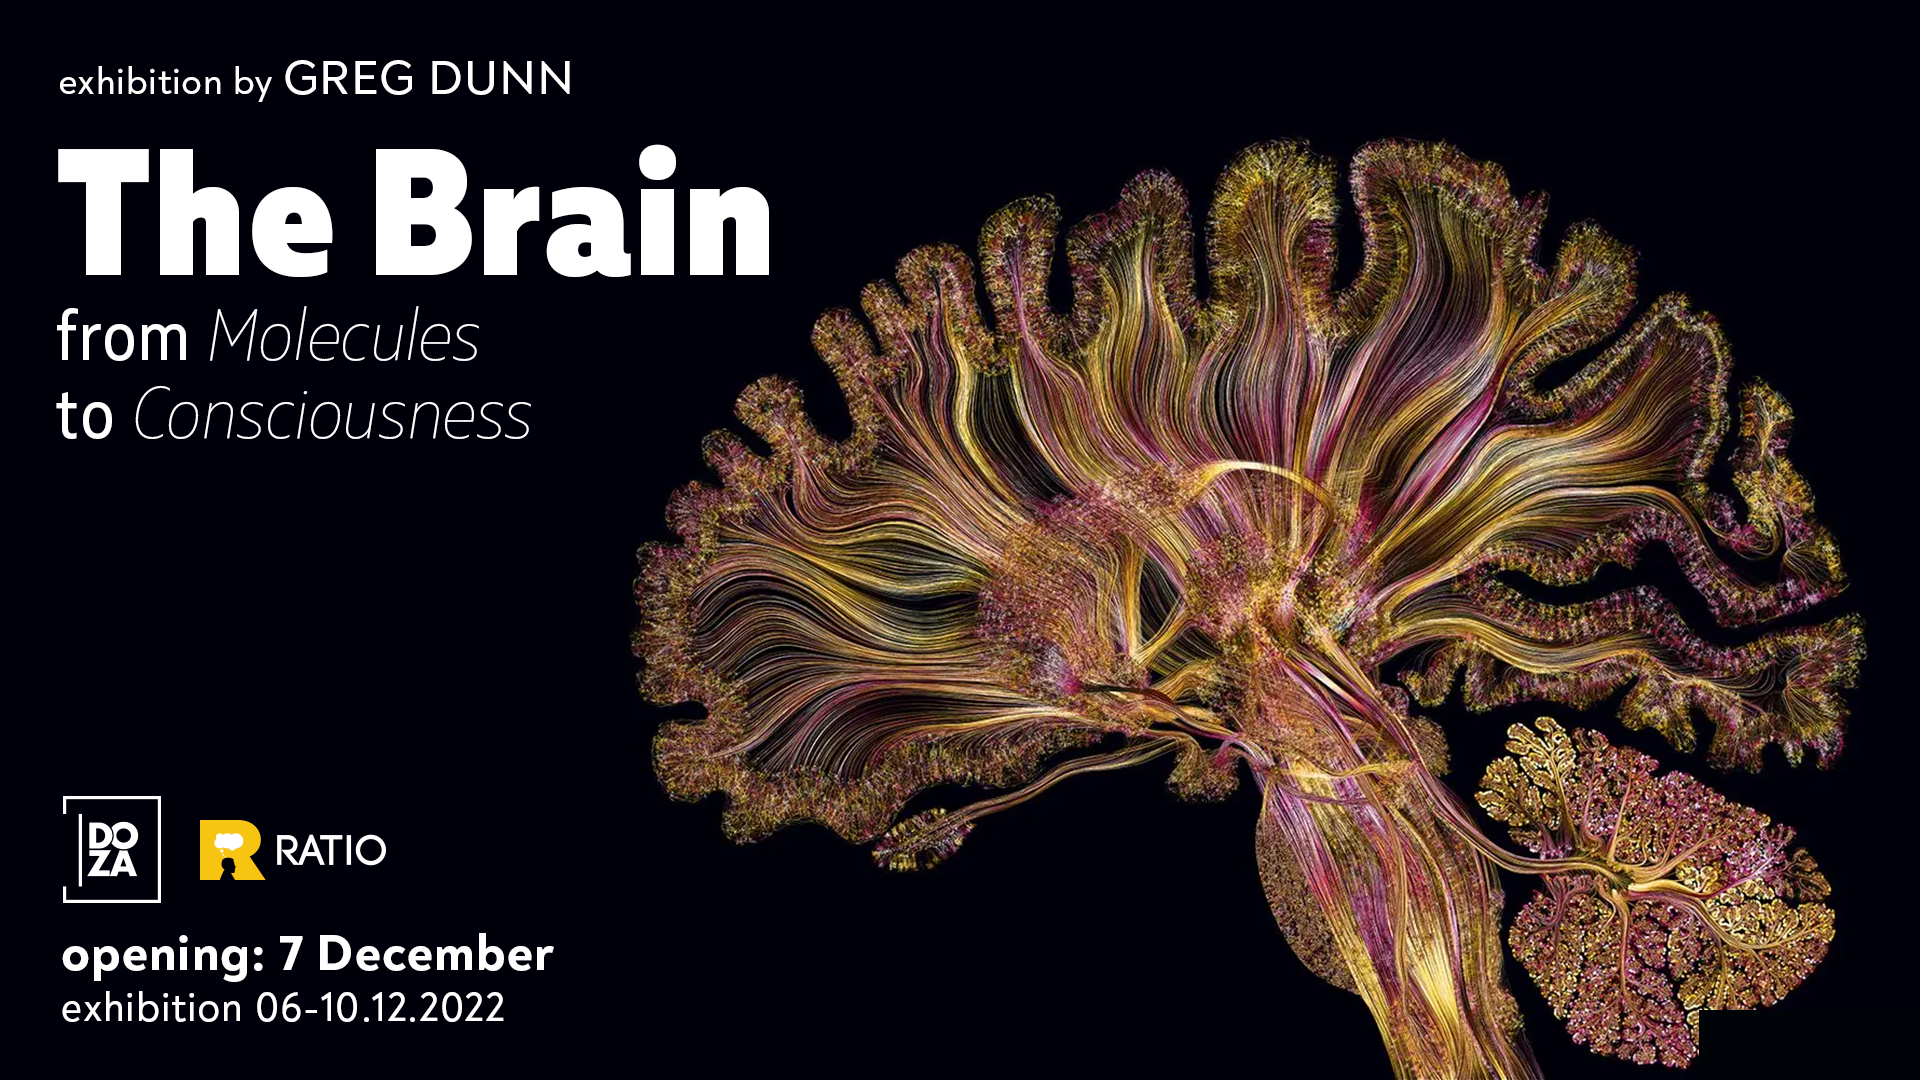 The Brain from Molecules to Consciousness: Art w Greg Dunn